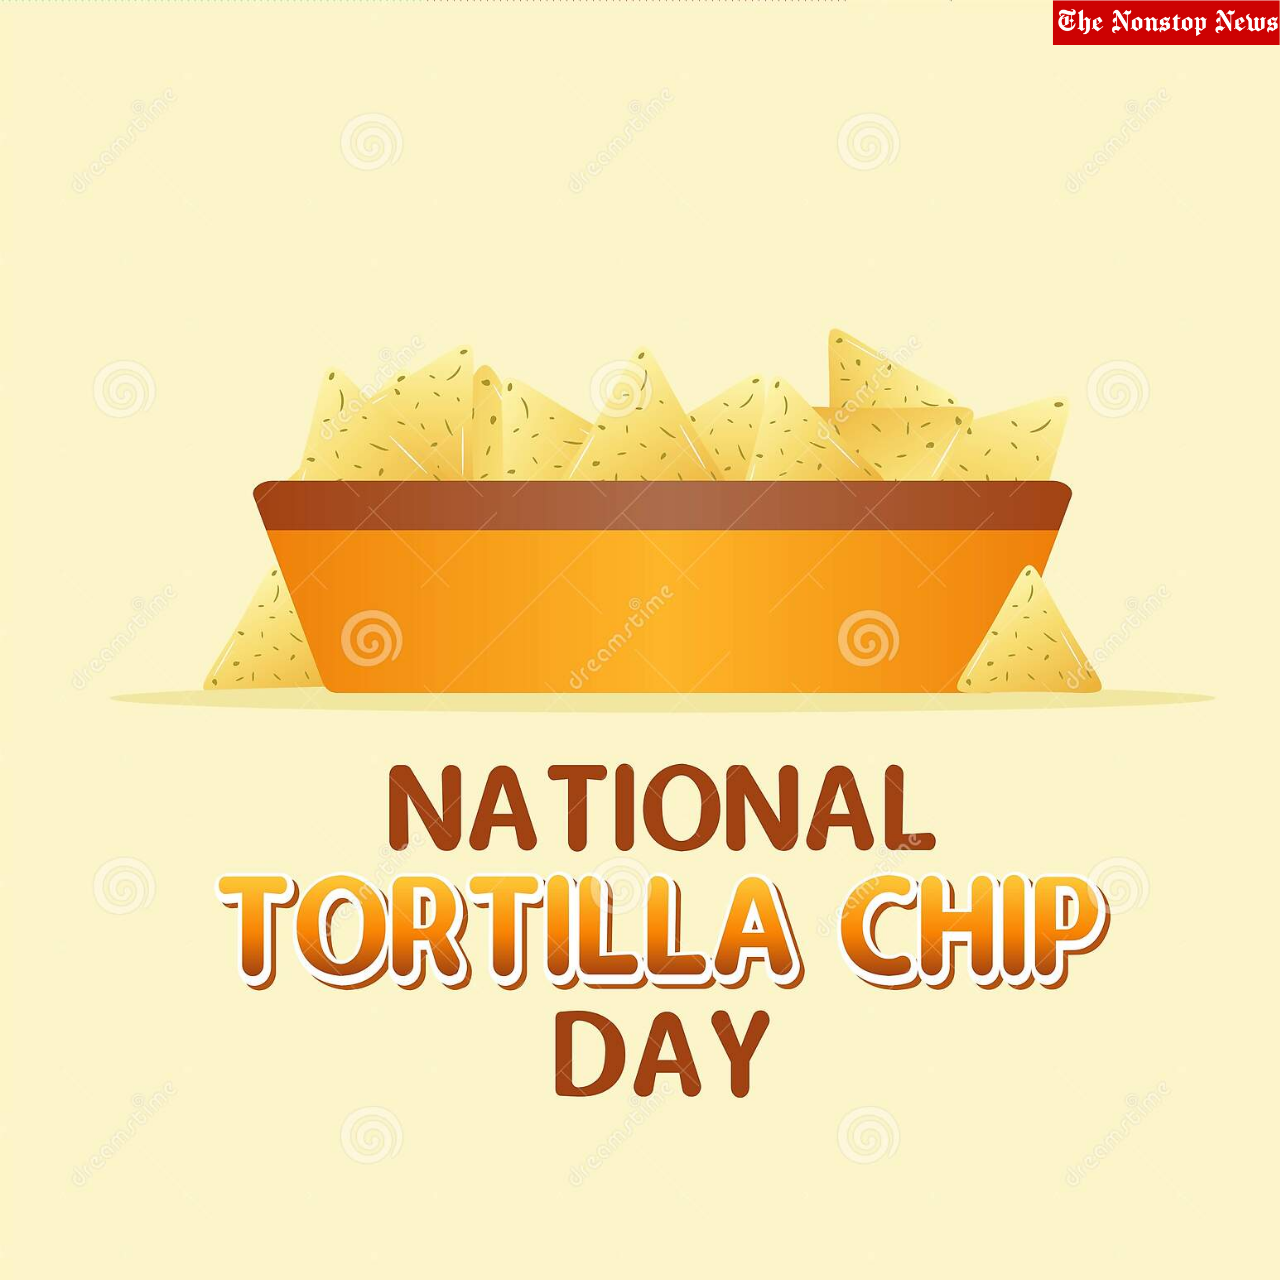 National Tortilla Chip Day (USA) 2022 HD Images, Quotes, Memes, Clipart to Share